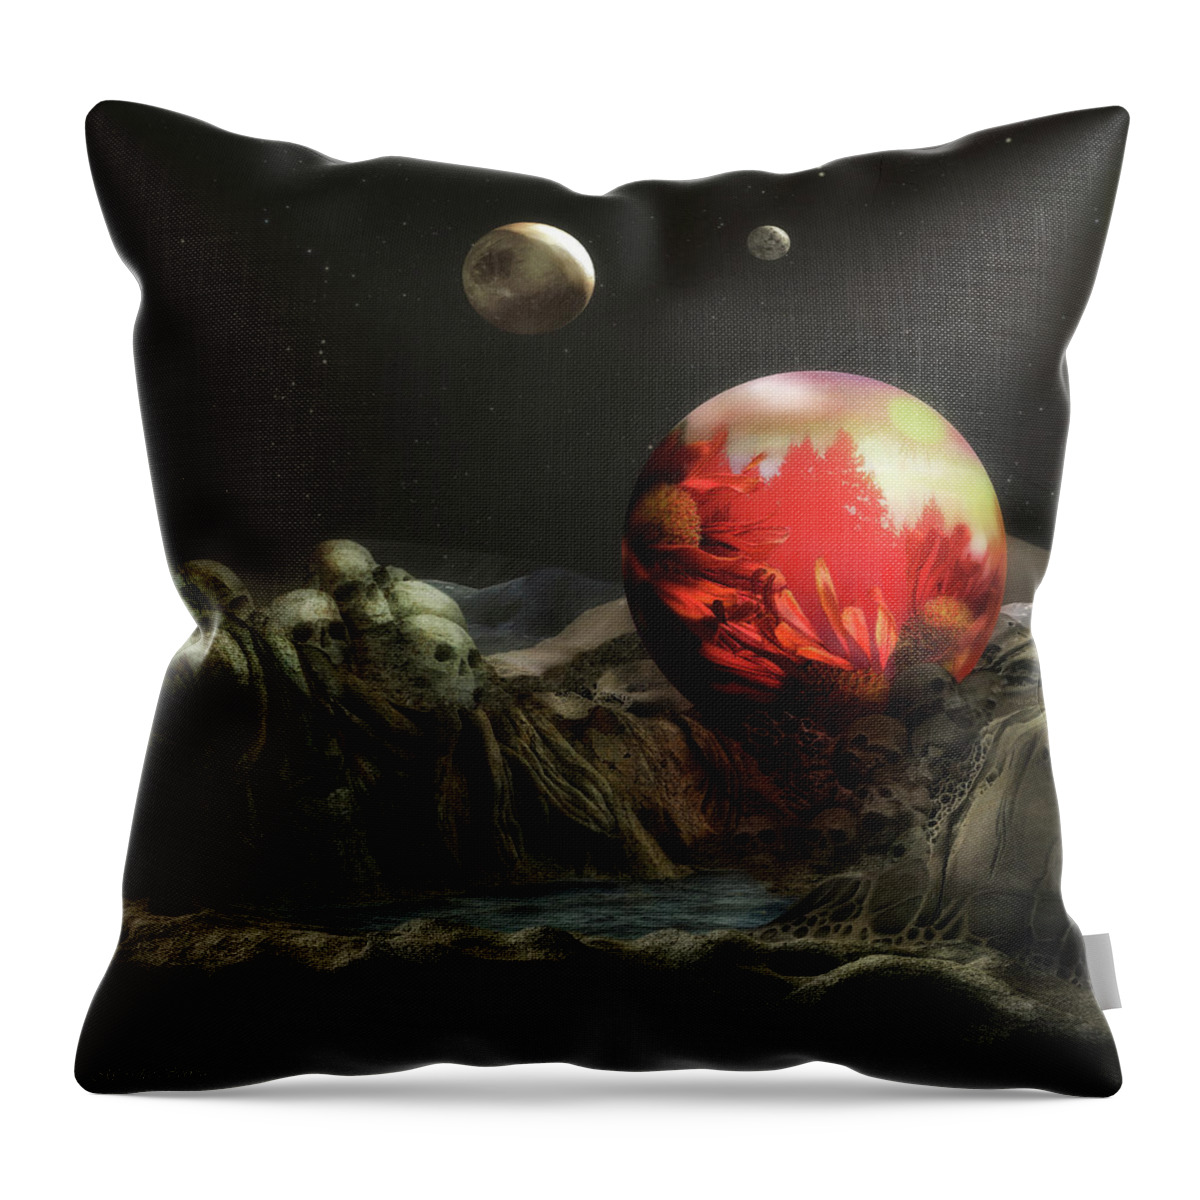 Surreal Throw Pillow featuring the digital art Hope by Merrilee Soberg